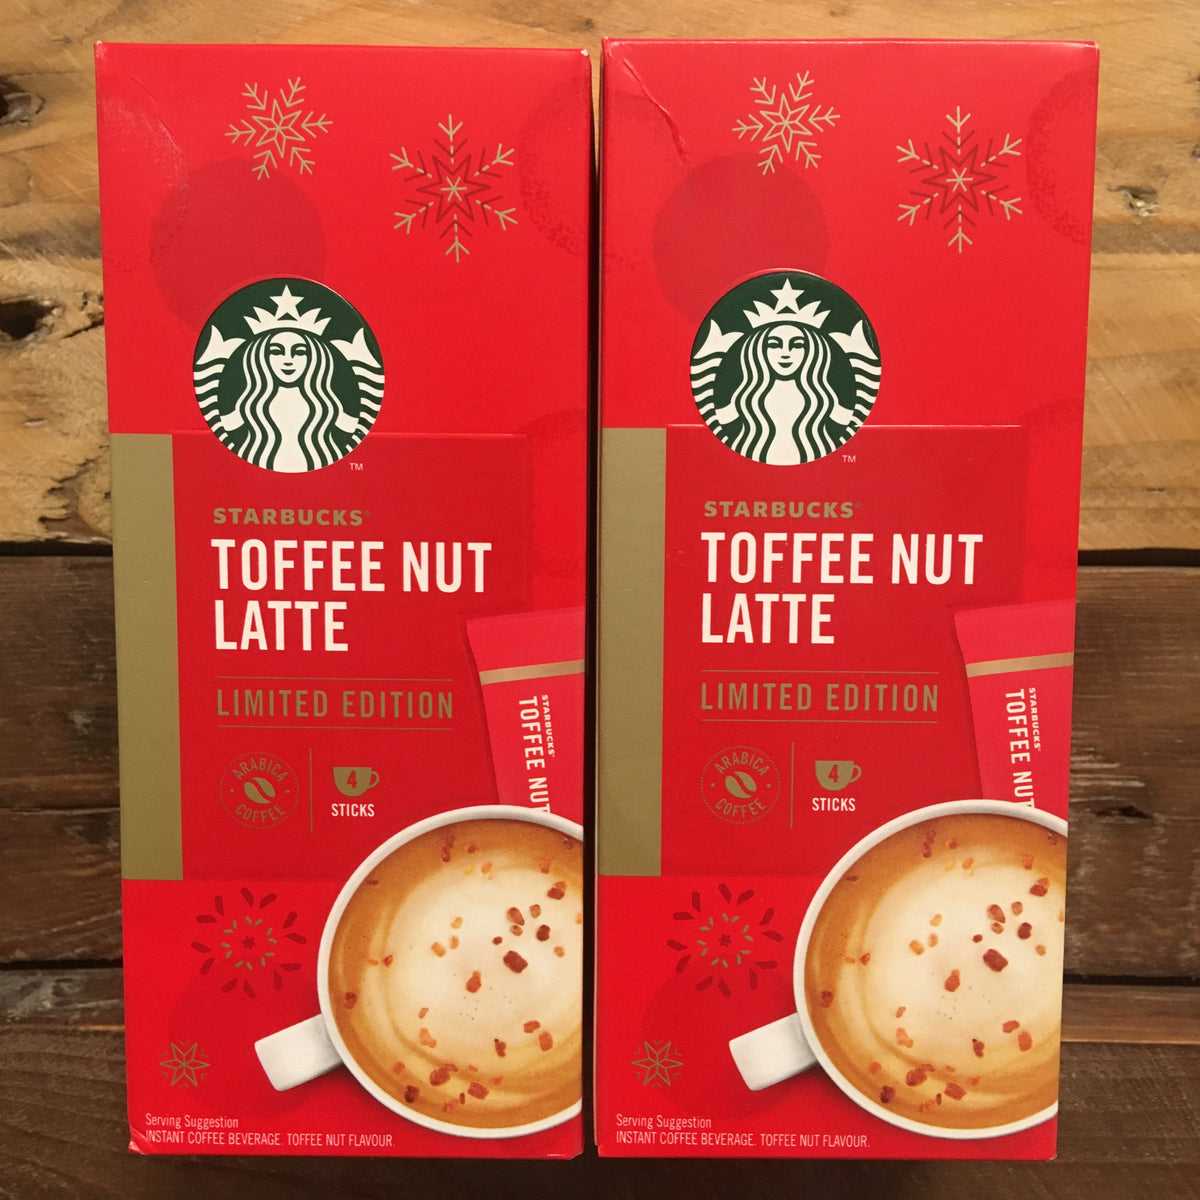 Browse 8x Starbucks Toffee Nut Latte Instant Coffee Sachets (2 Boxes of 4  Sachets) Starbucks , and more. Save money when you shop at our shop